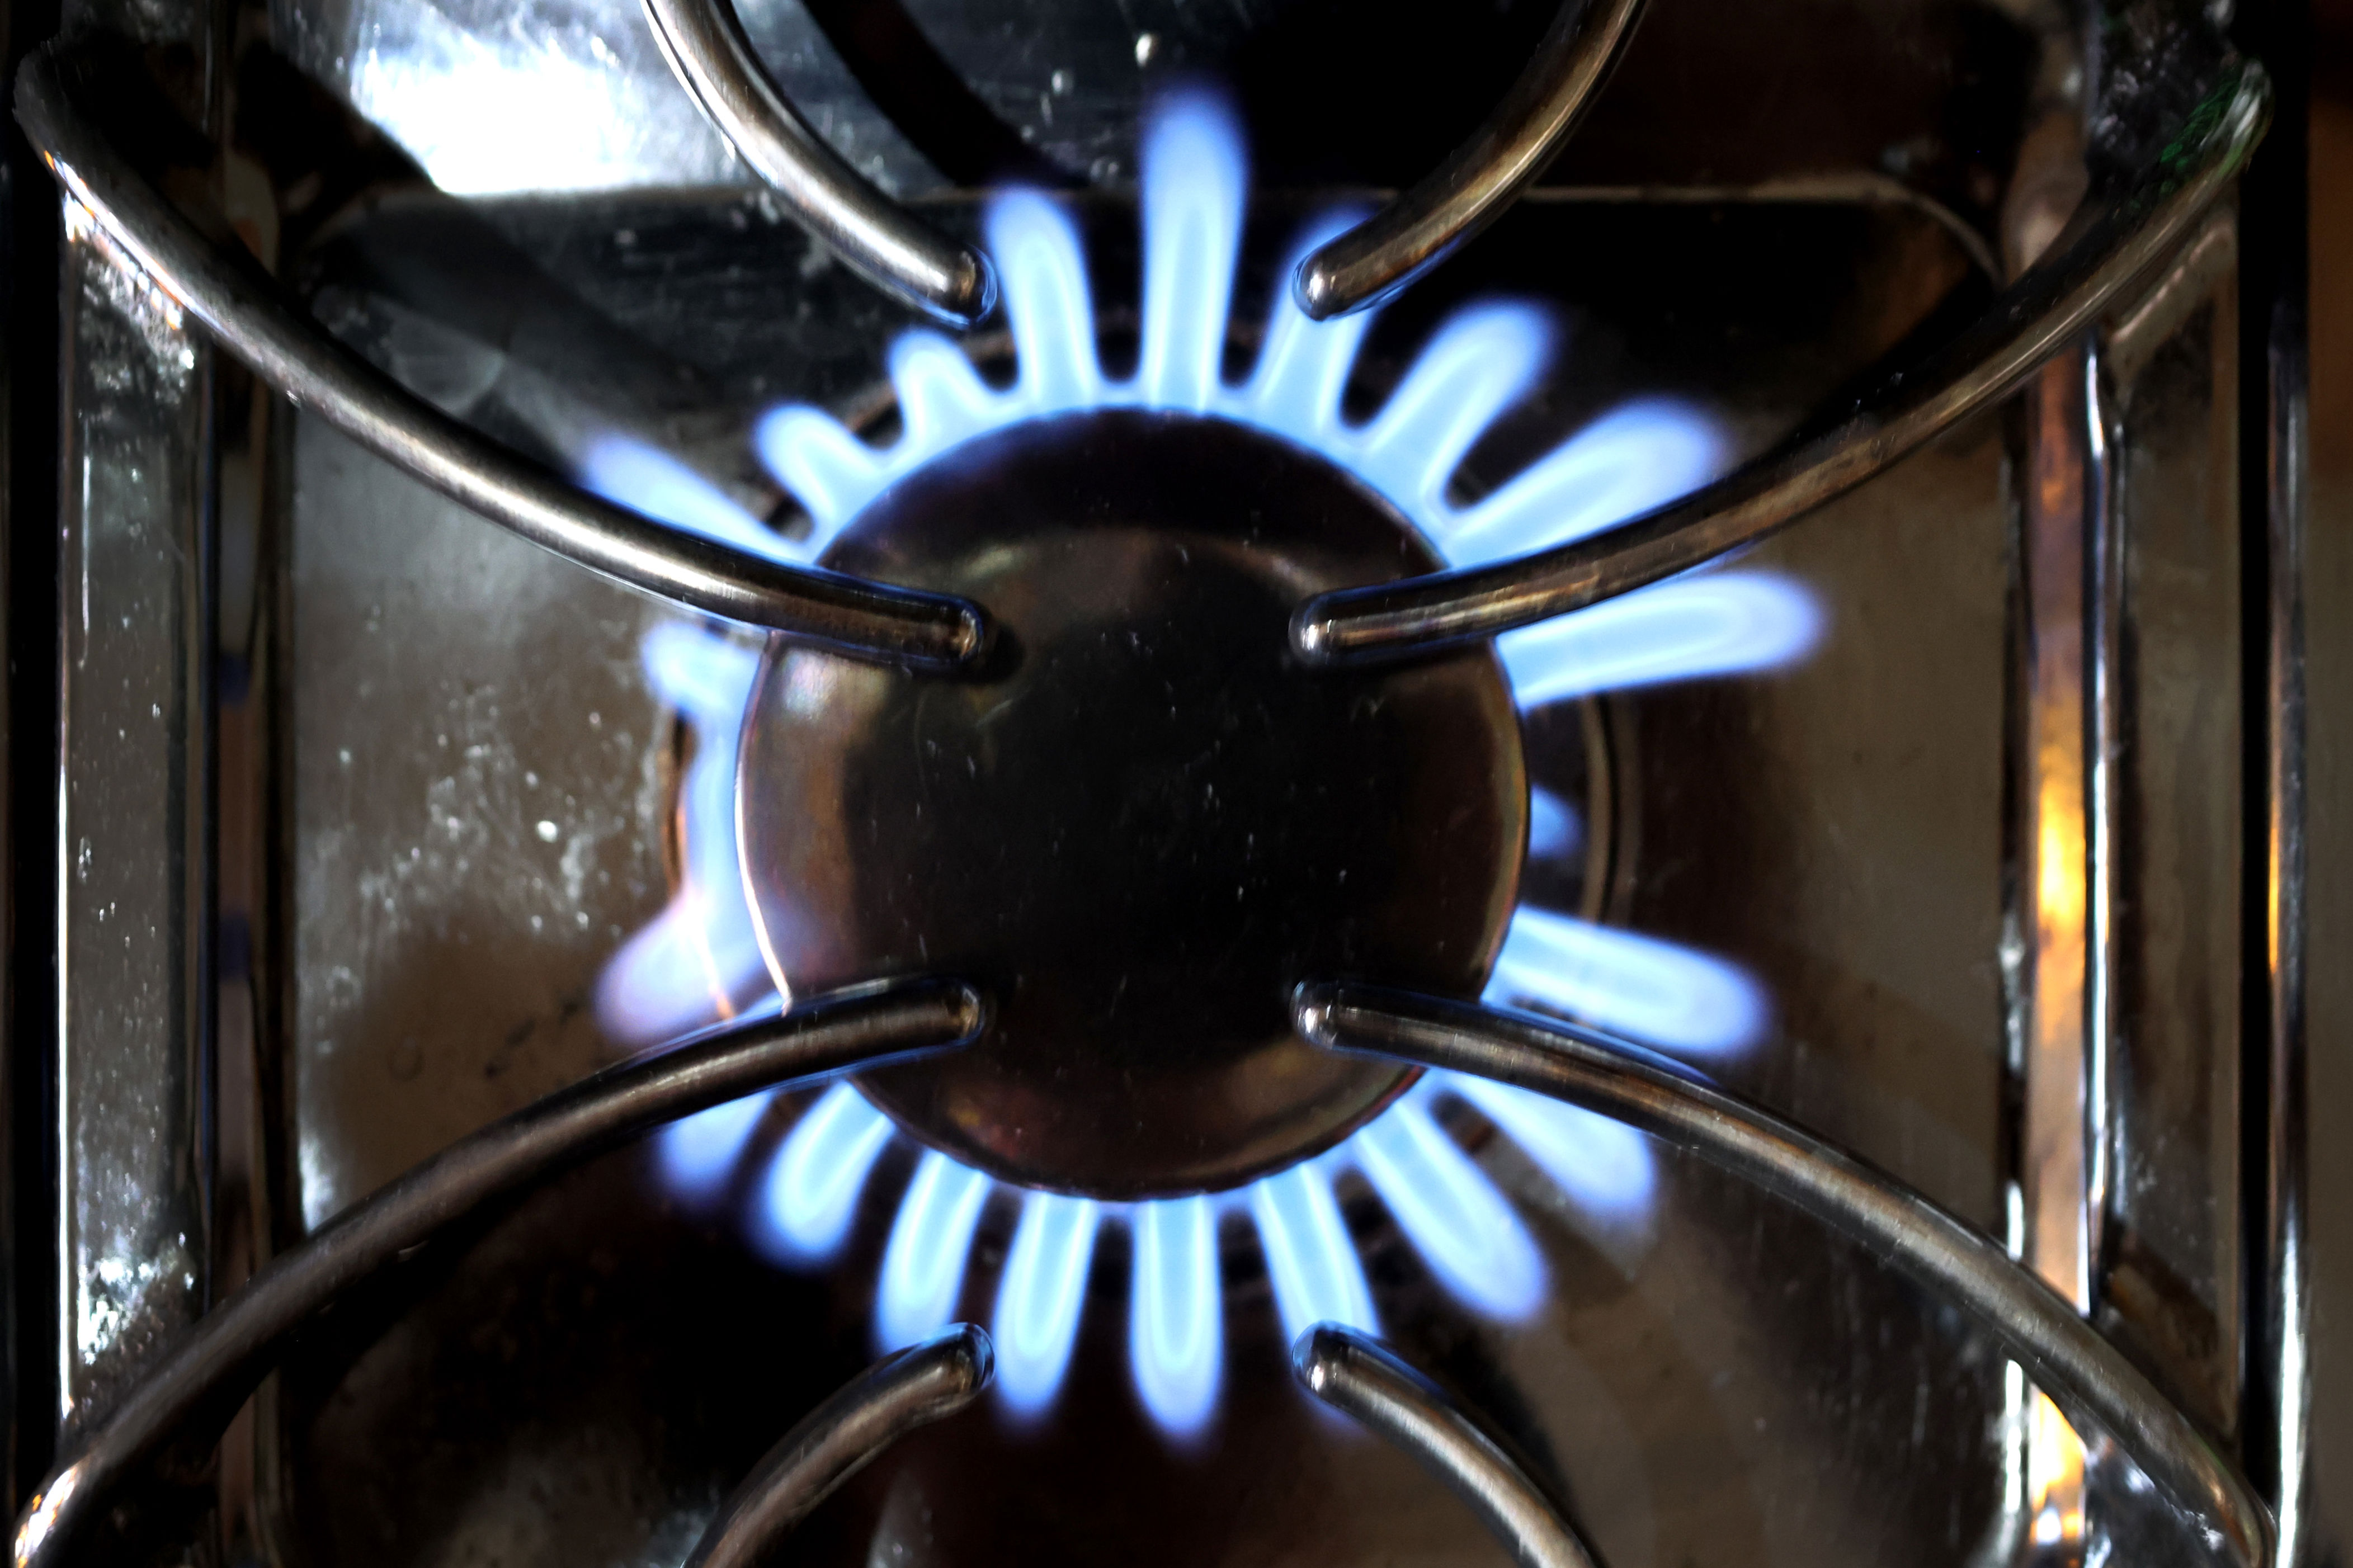 gas stoves spread harmful pollution beyond the kitchen, study finds